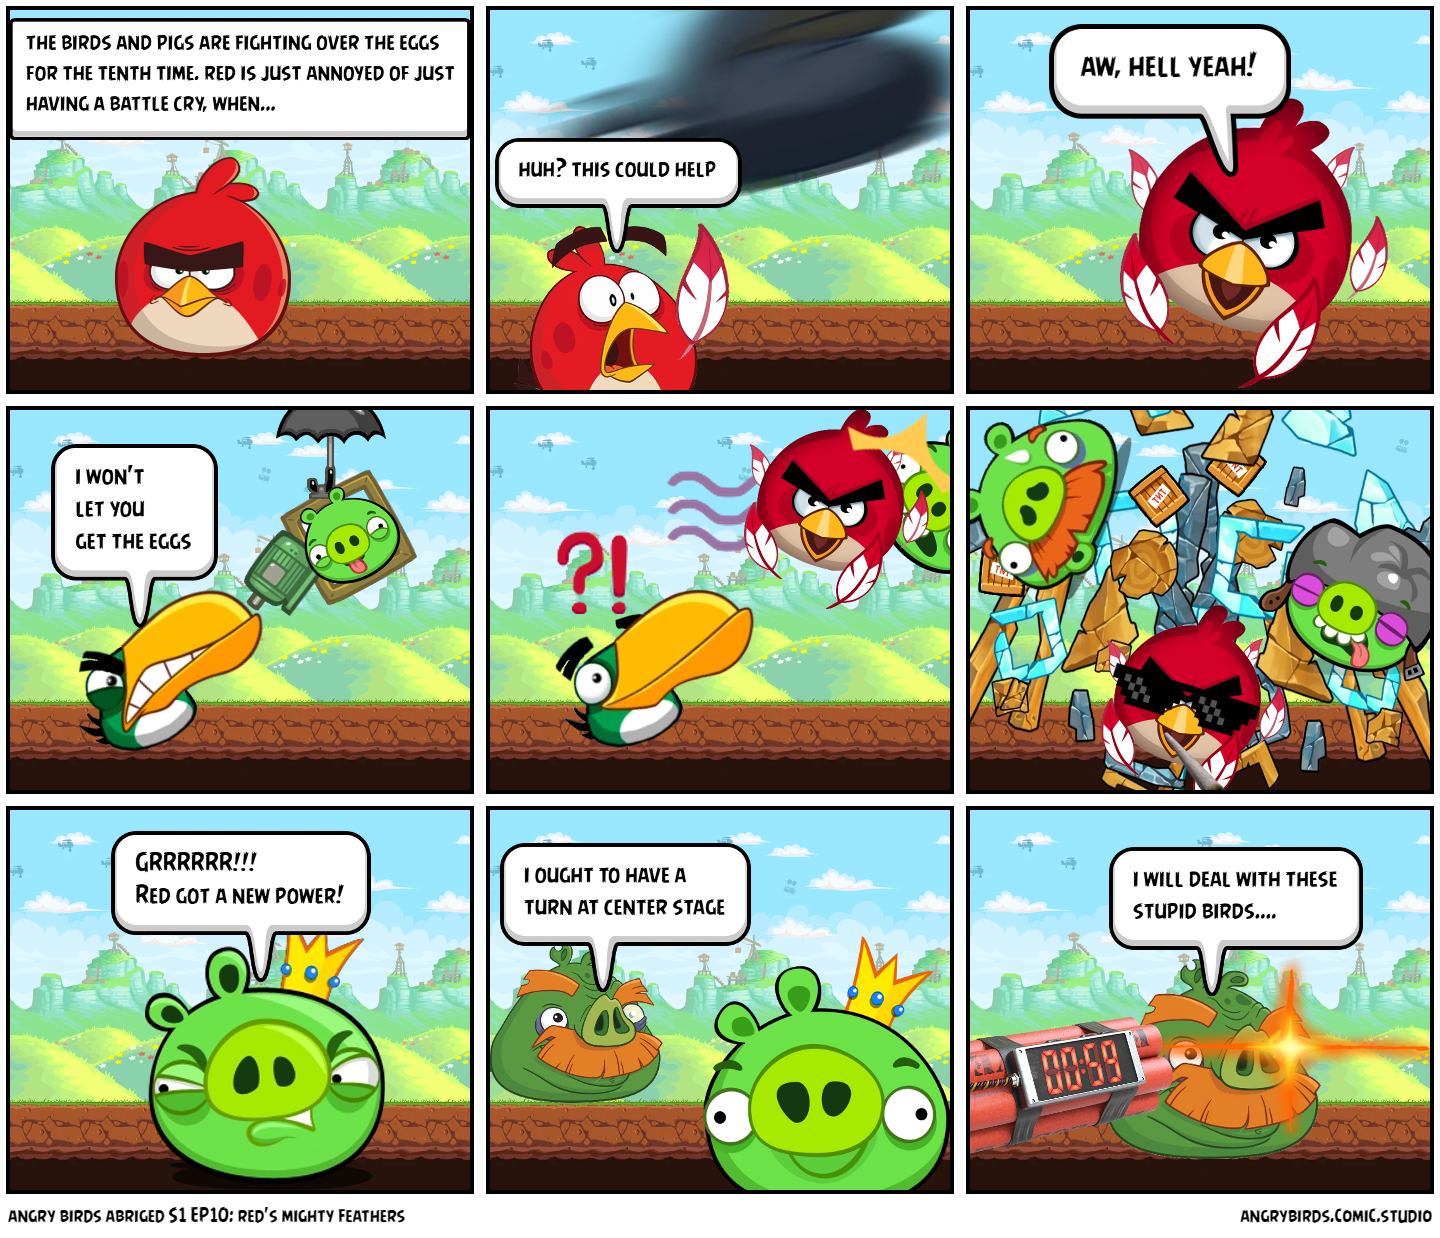 angry birds abriged S1 EP10: red's mighty feathers